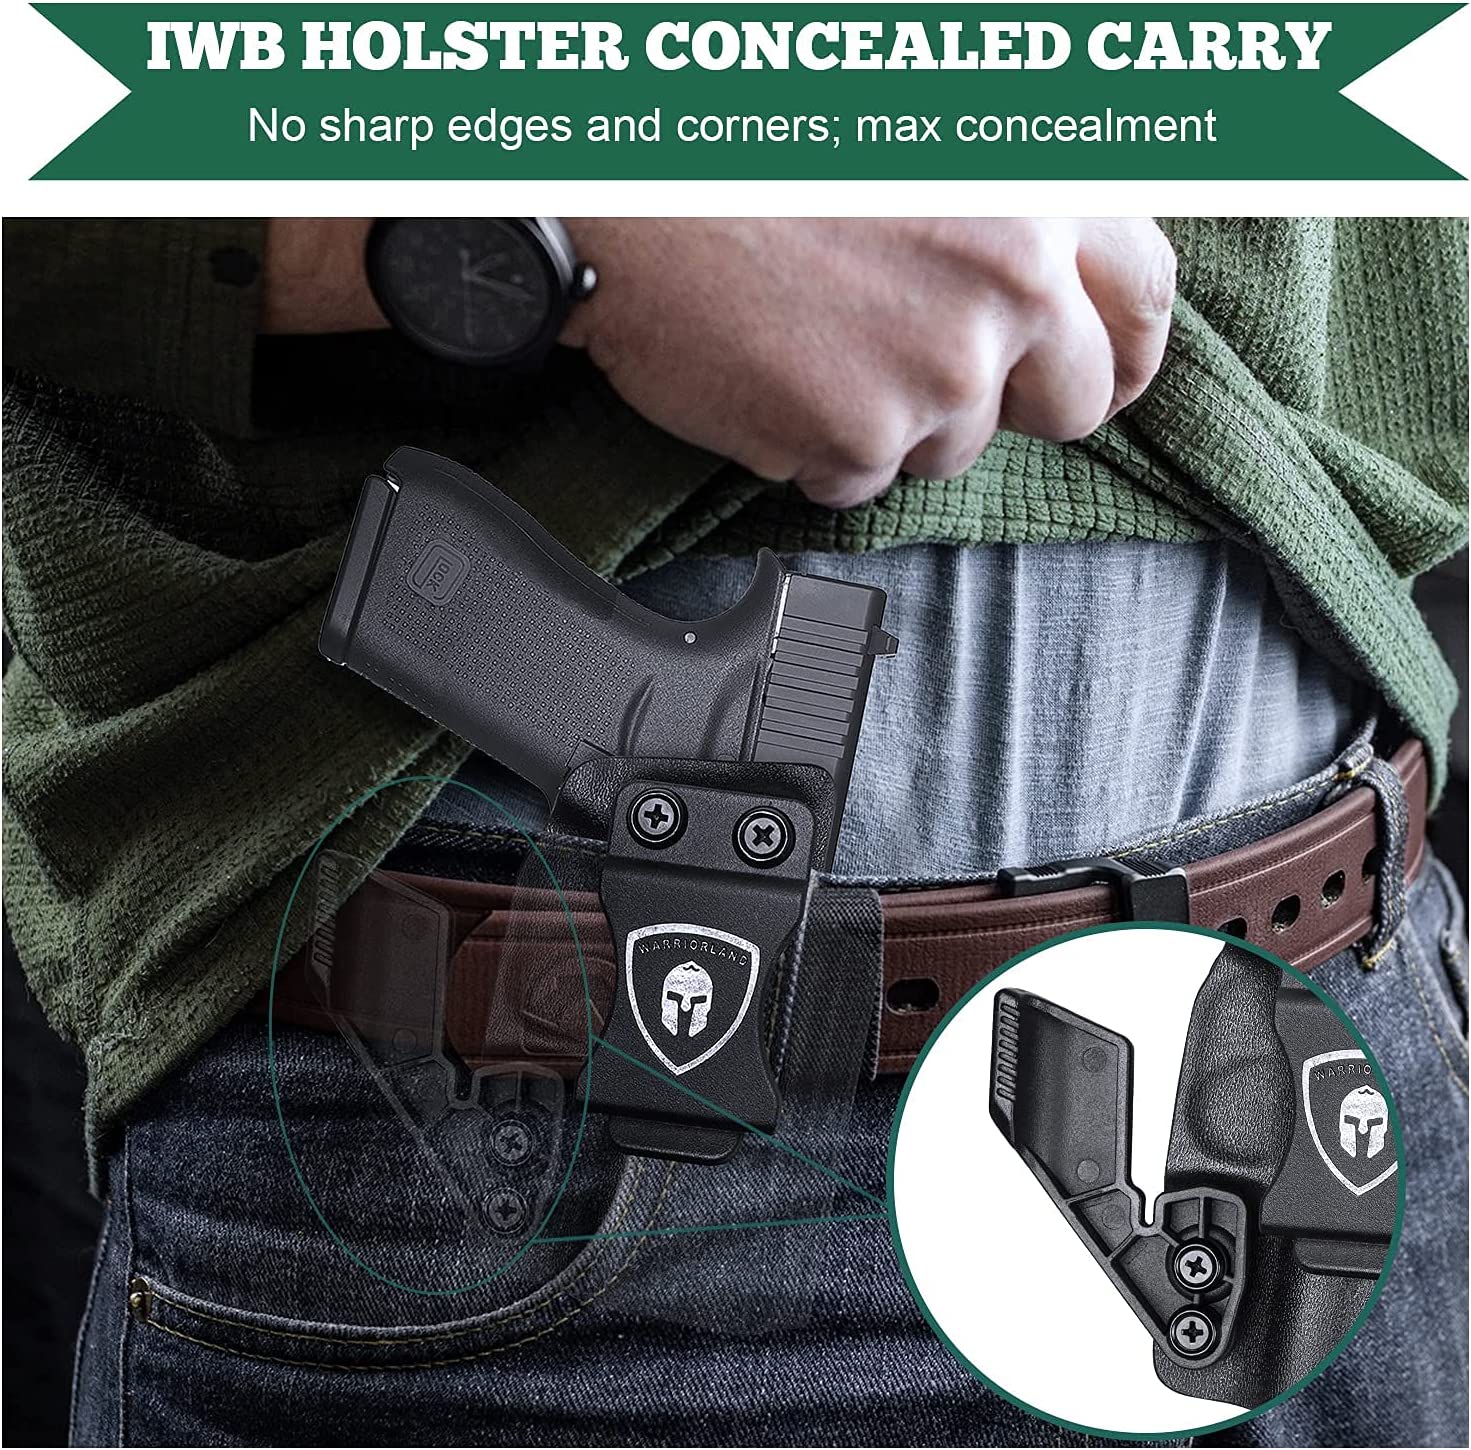 Claw Kit Concealed Carry Wing Only For Warriorland Metal Belt Clip IWB Holsters